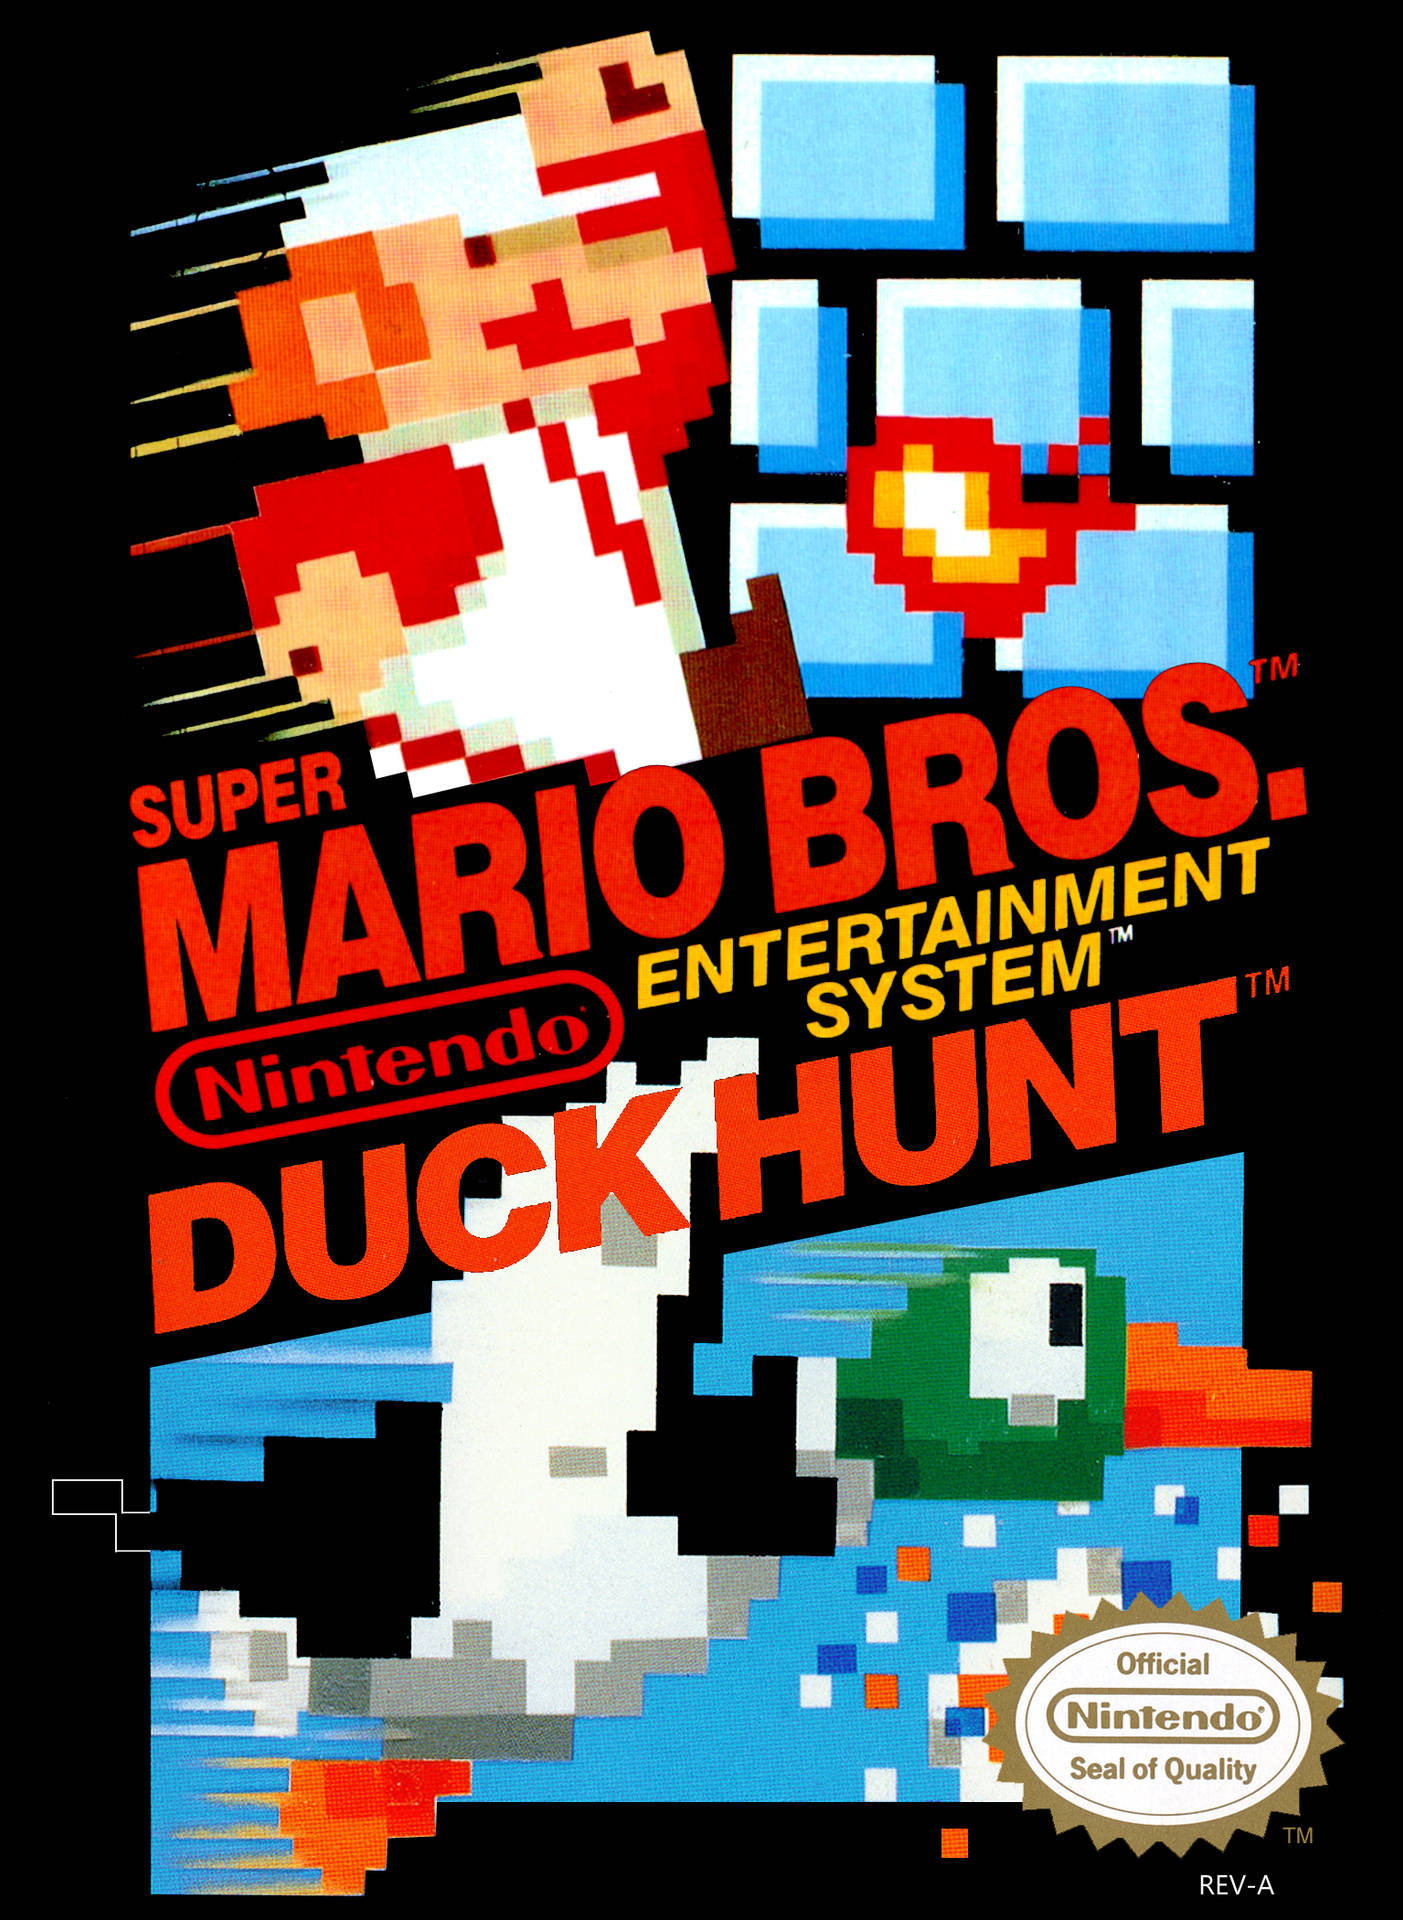 Duckhunt Mario Bros Is Translated To German As 